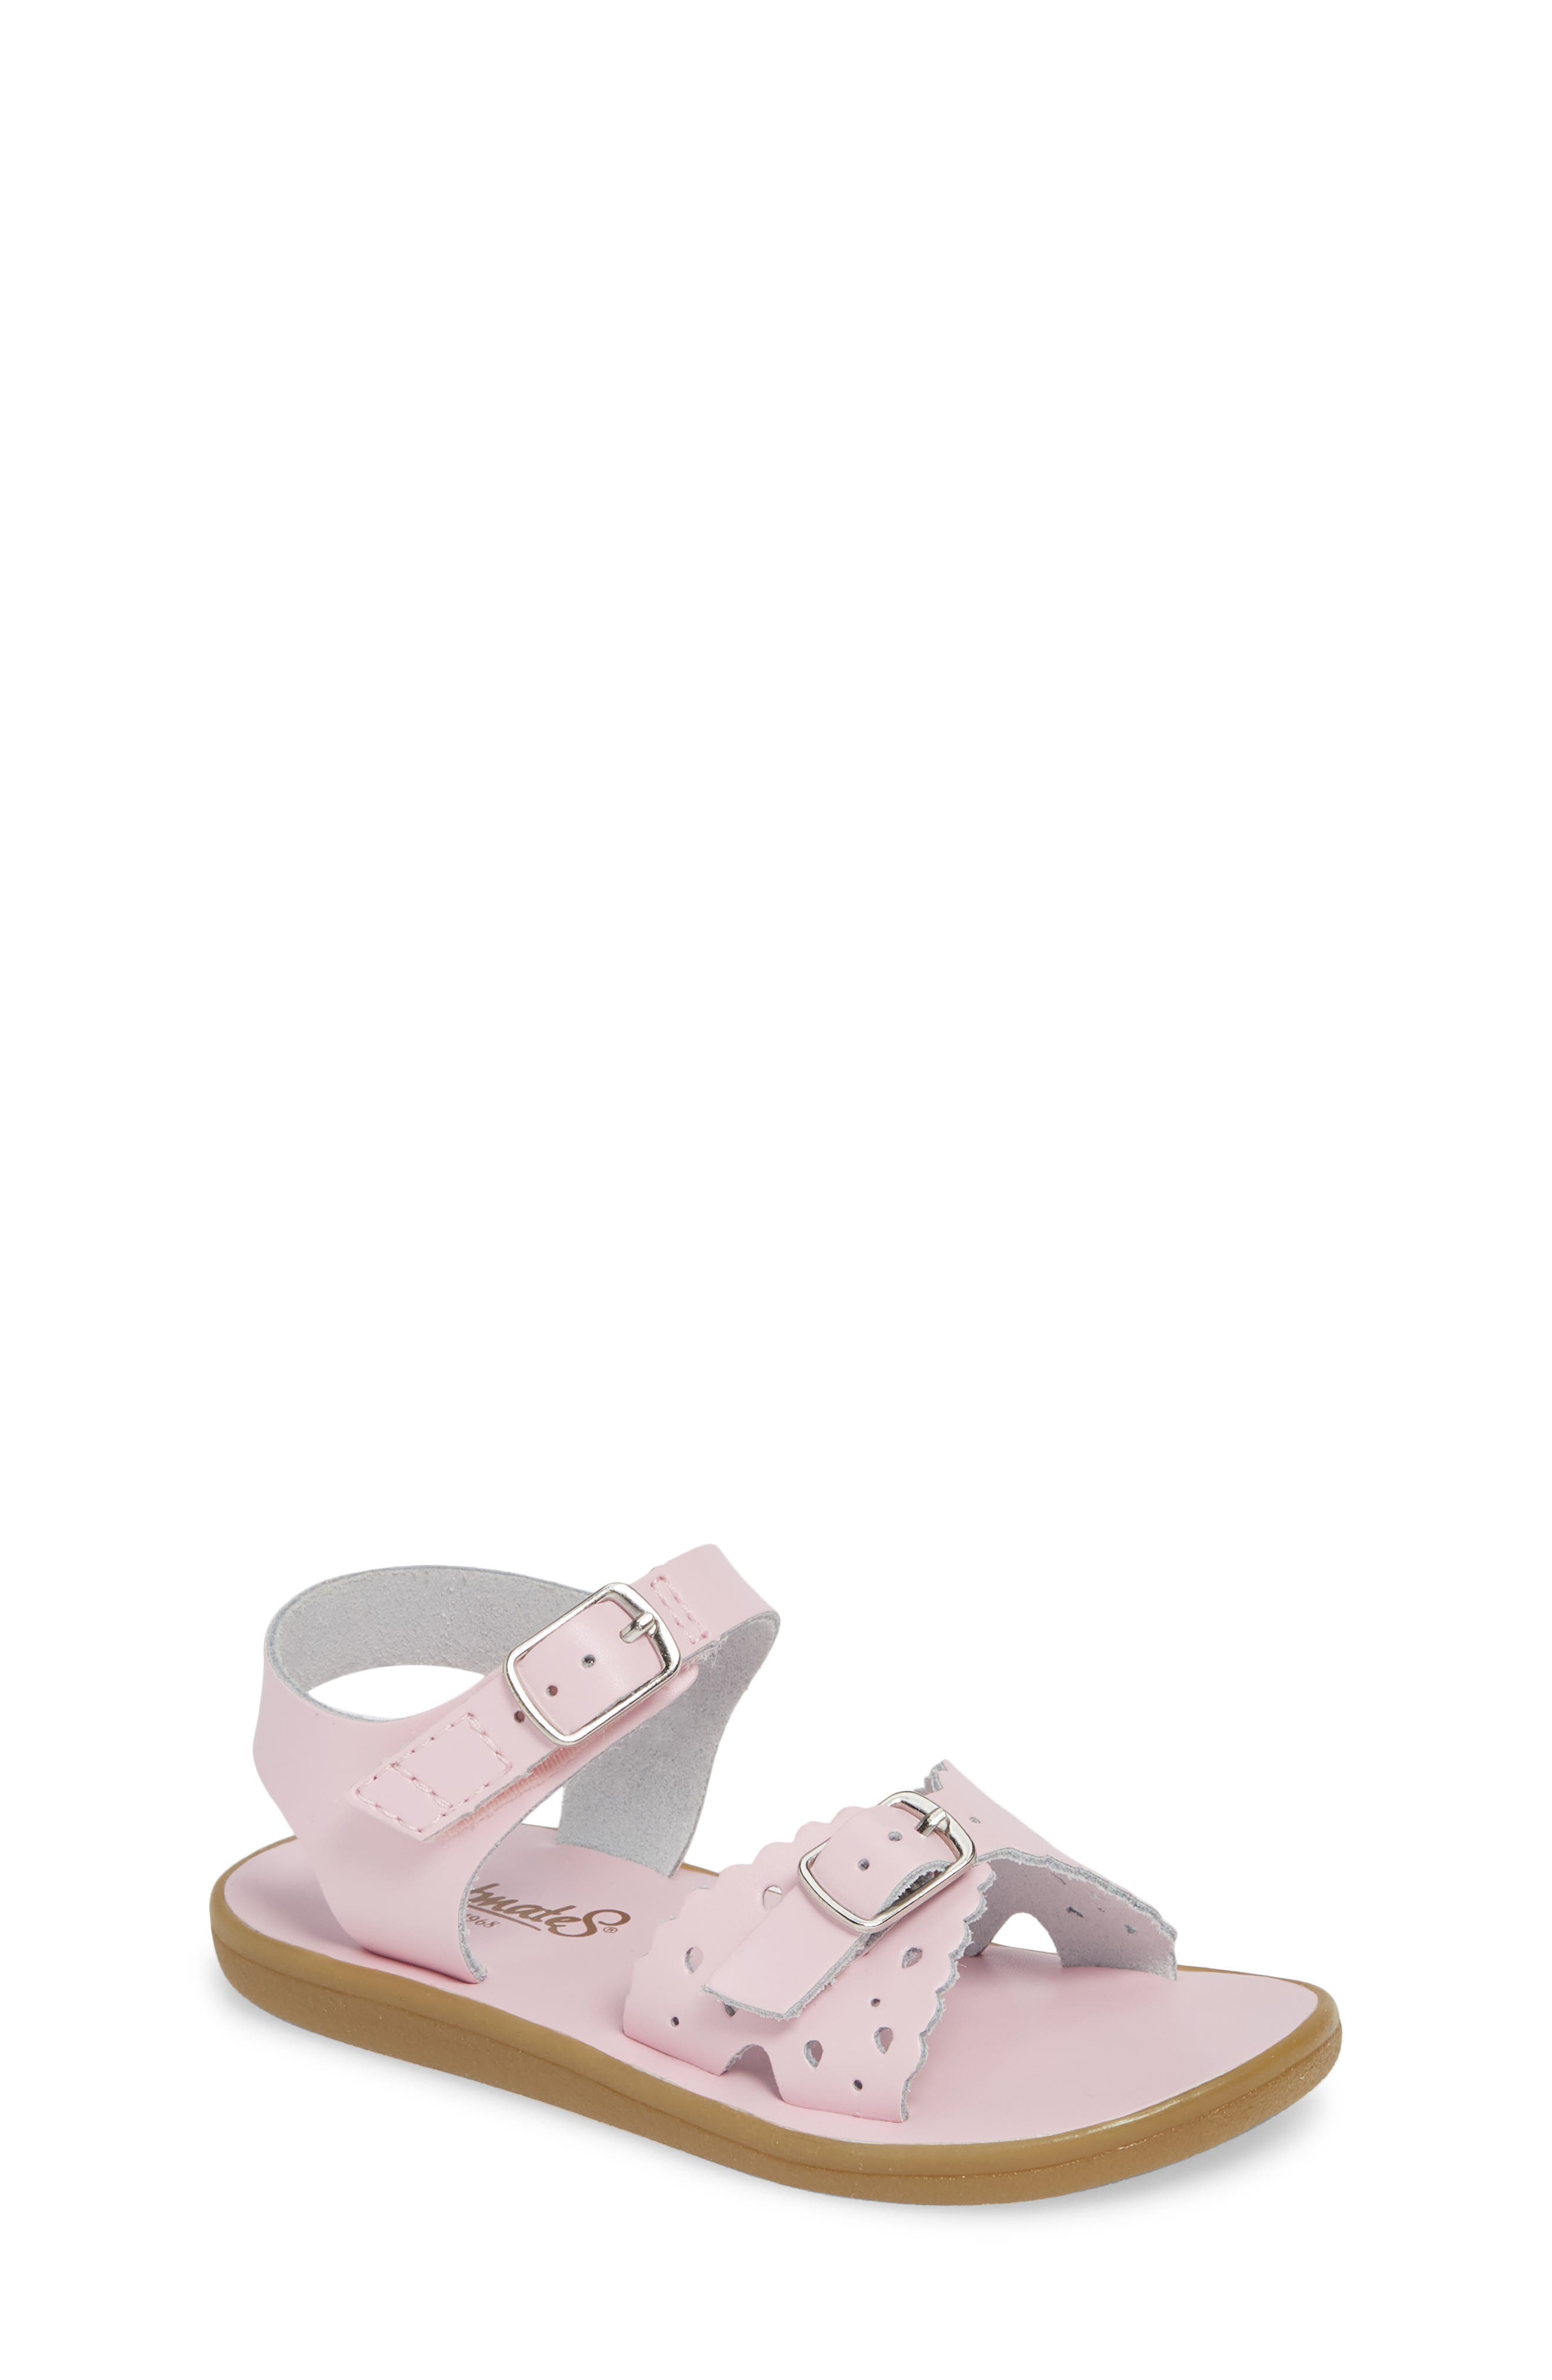 Cute Baby Girl's Shoes Strap Sandal Toddler Size Comfy Pink Or Silver 